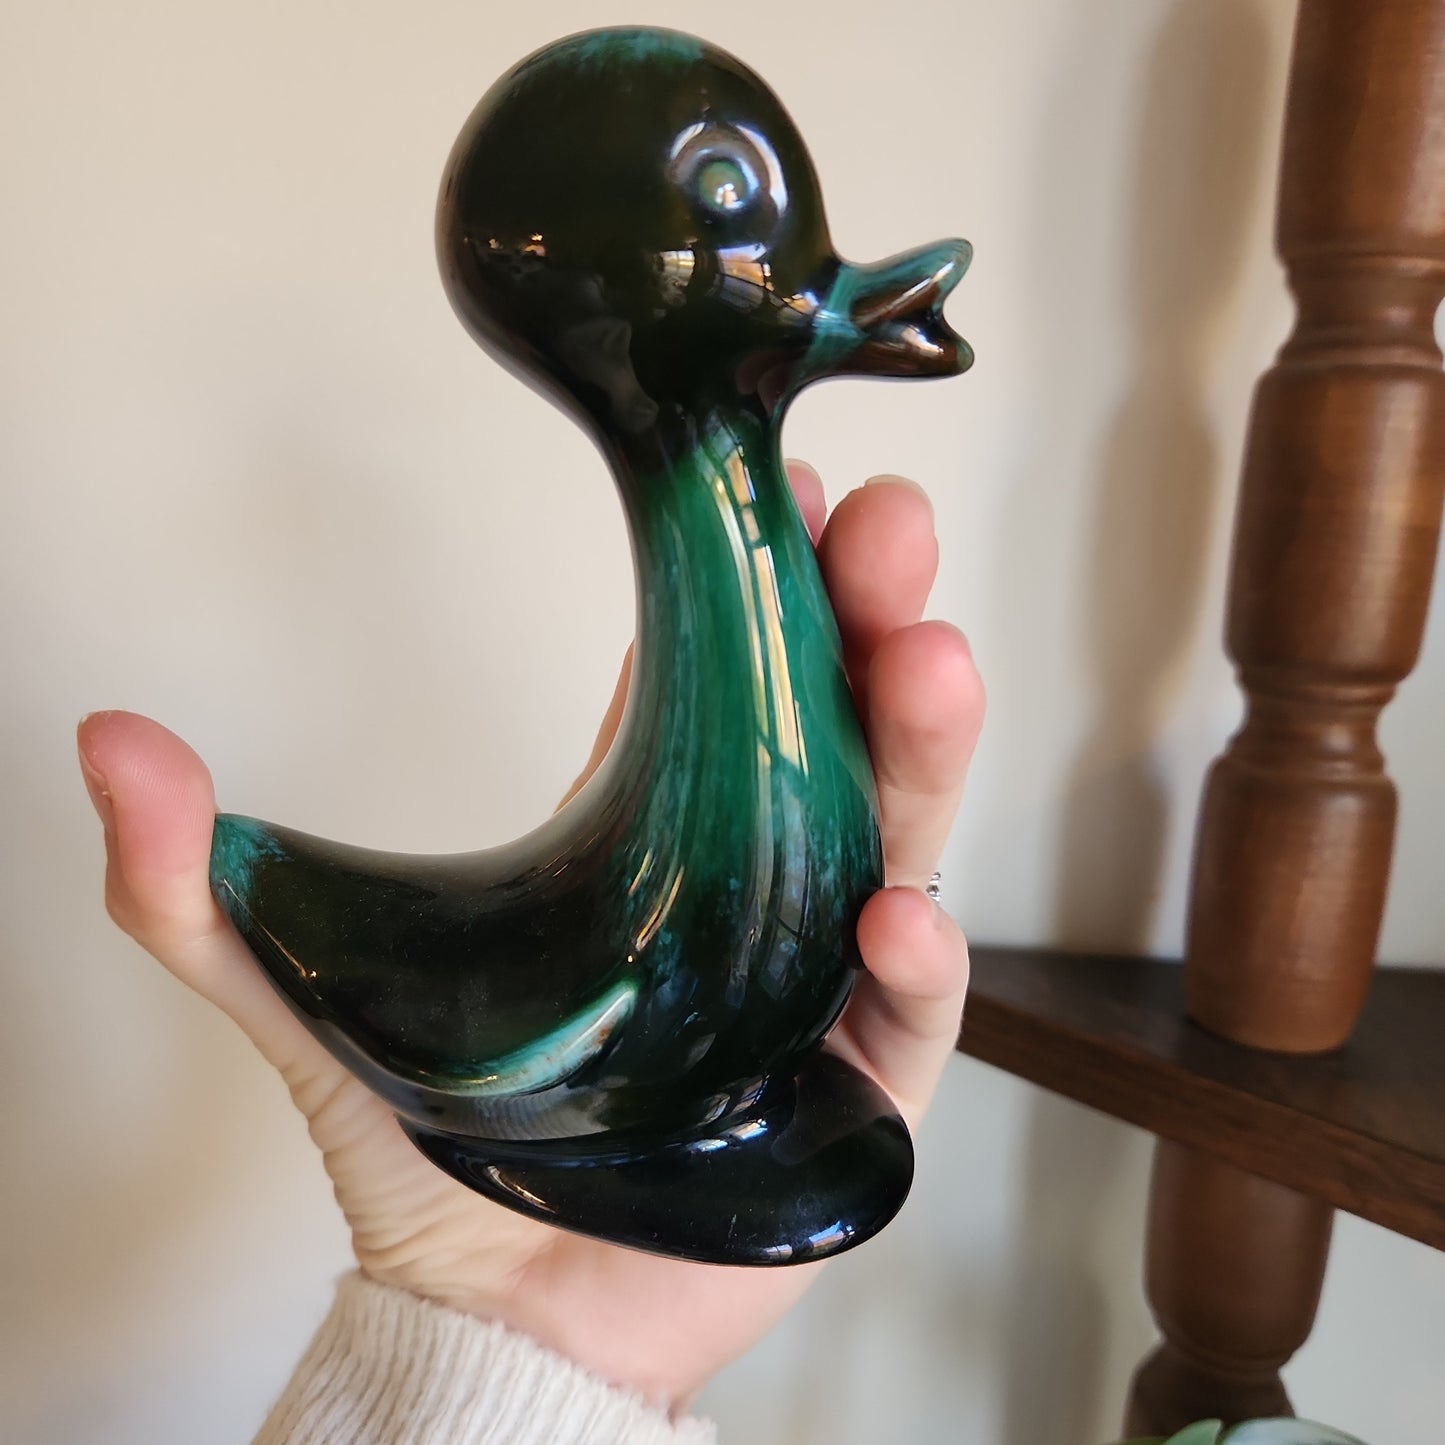 Blue Mountain Pottery Duck